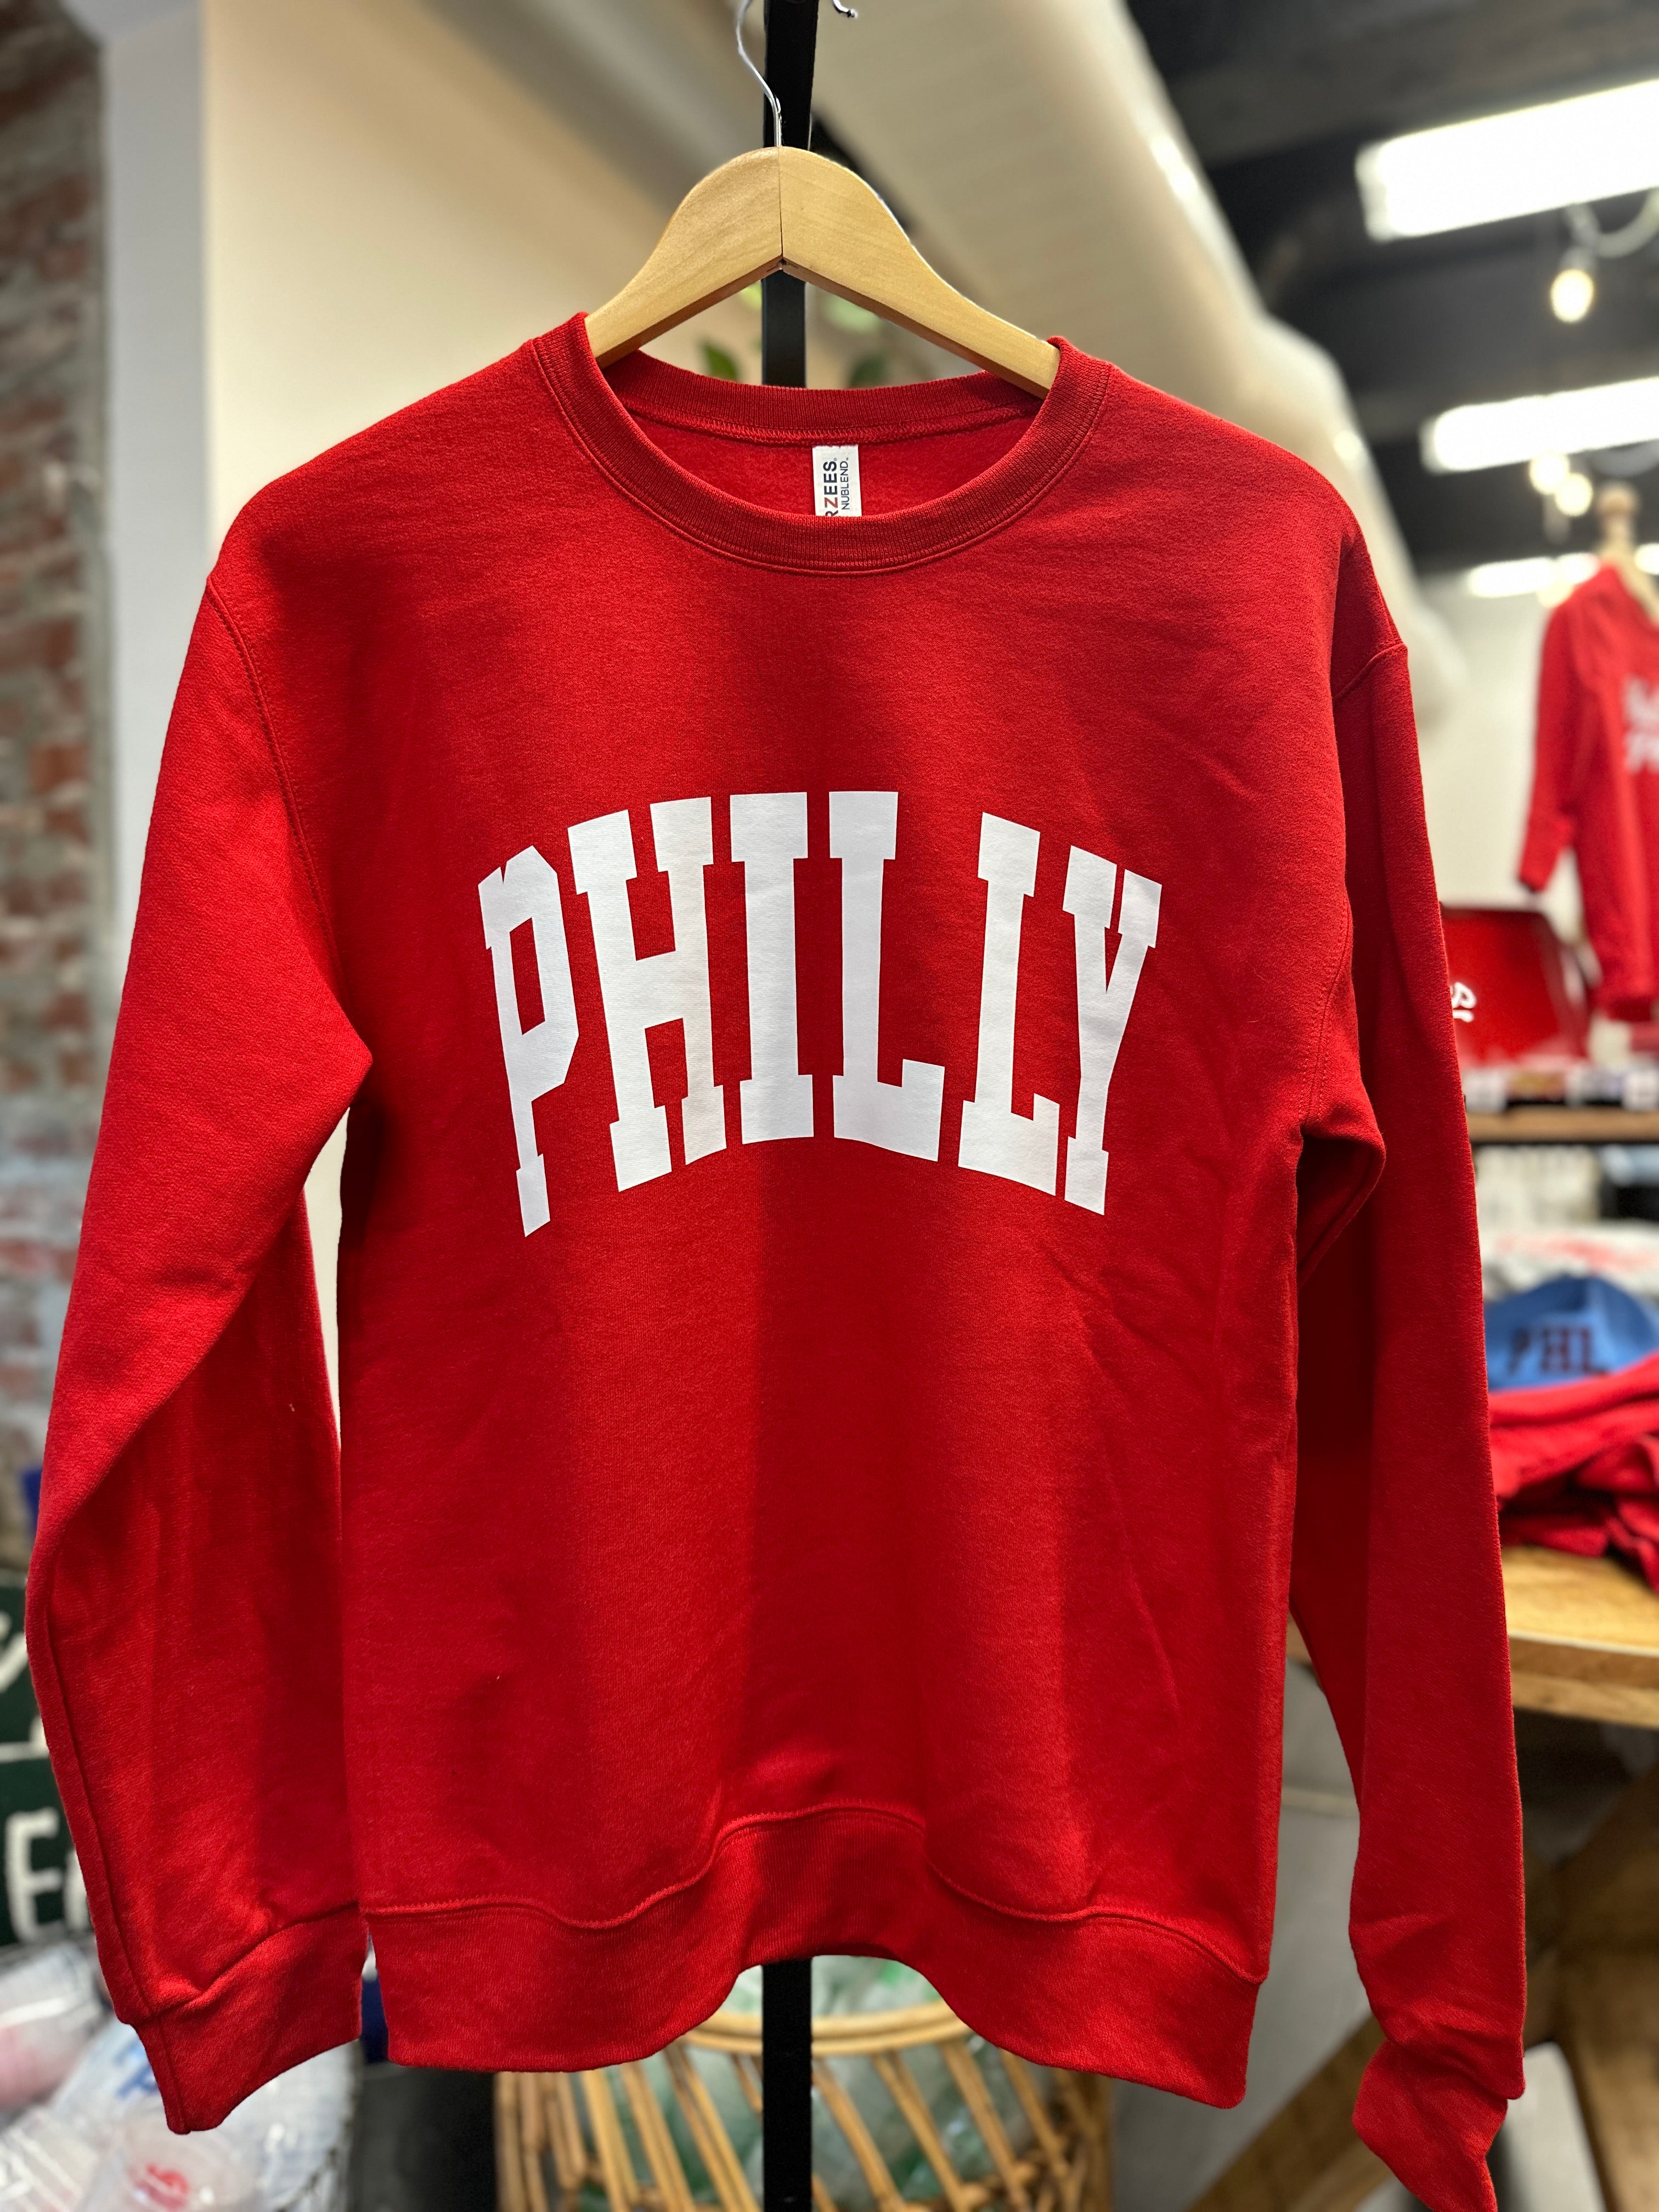 Philly Block Letter Crewneck